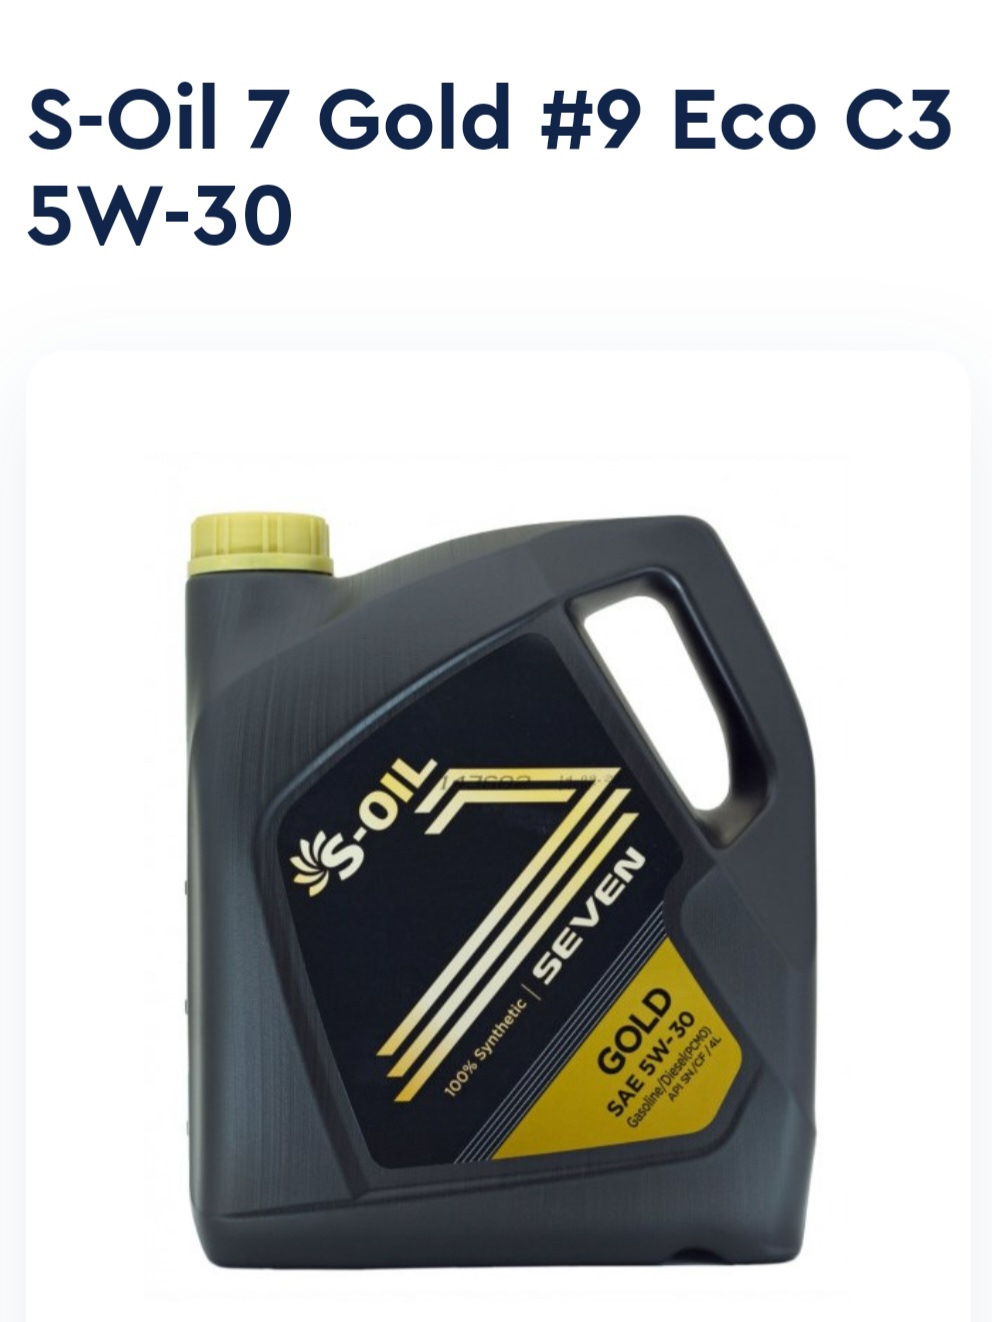 Масло моторное s Oil 7 Gold 9 ЕСО СЗ 5w 30 цвет. Масло моторное s Oil 7 Gold 9 ЕСО СЗ 5w 30 цвет масла. S-Oil 7 Gold #9 c5 0w20. Масло моторное s Oil 7 Gold 9 ЕСО СЗ 5w 30 тест цвет масла.